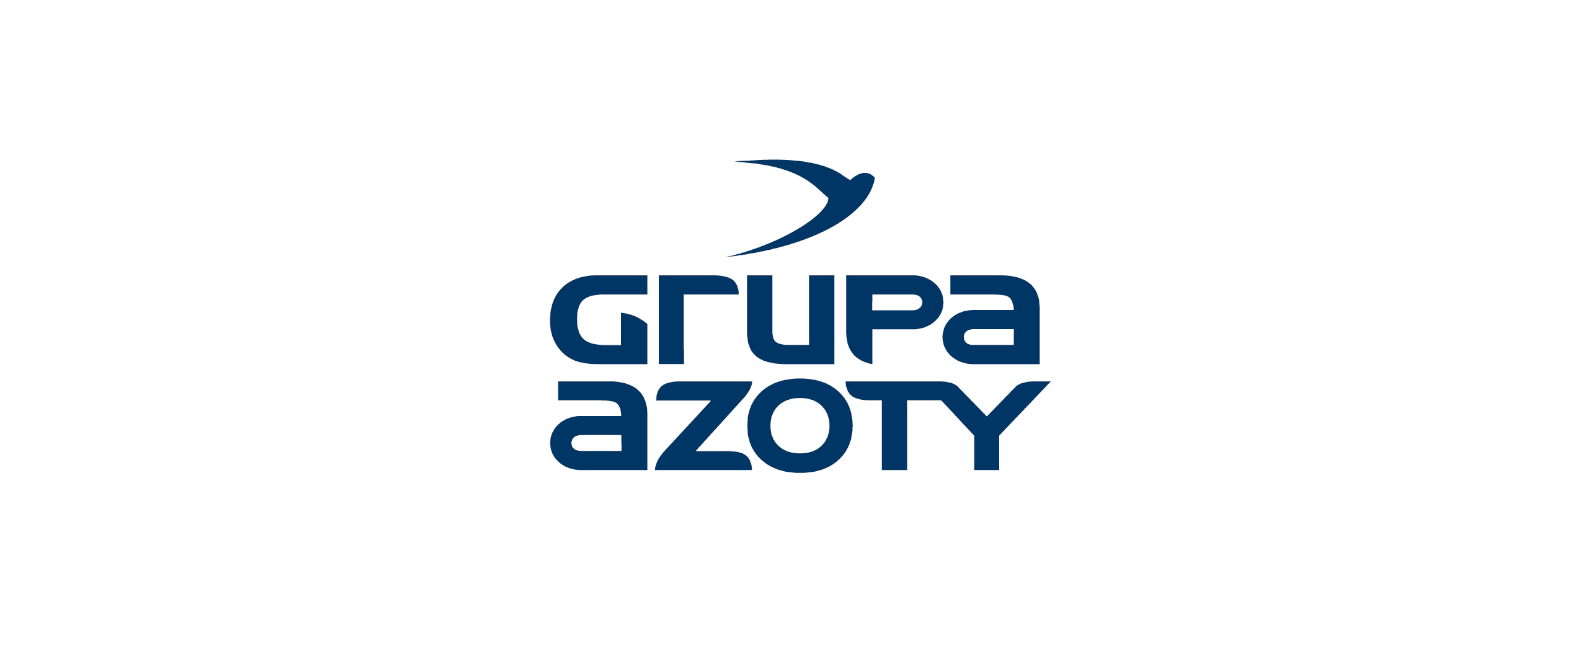 Grupa Azoty S.A. to commence discussions with Orlen S.A. to cease actions related to potential acquisition of Grupa Azoty Zakłady Azotowe Puławy S.A. by Orlen S.A.